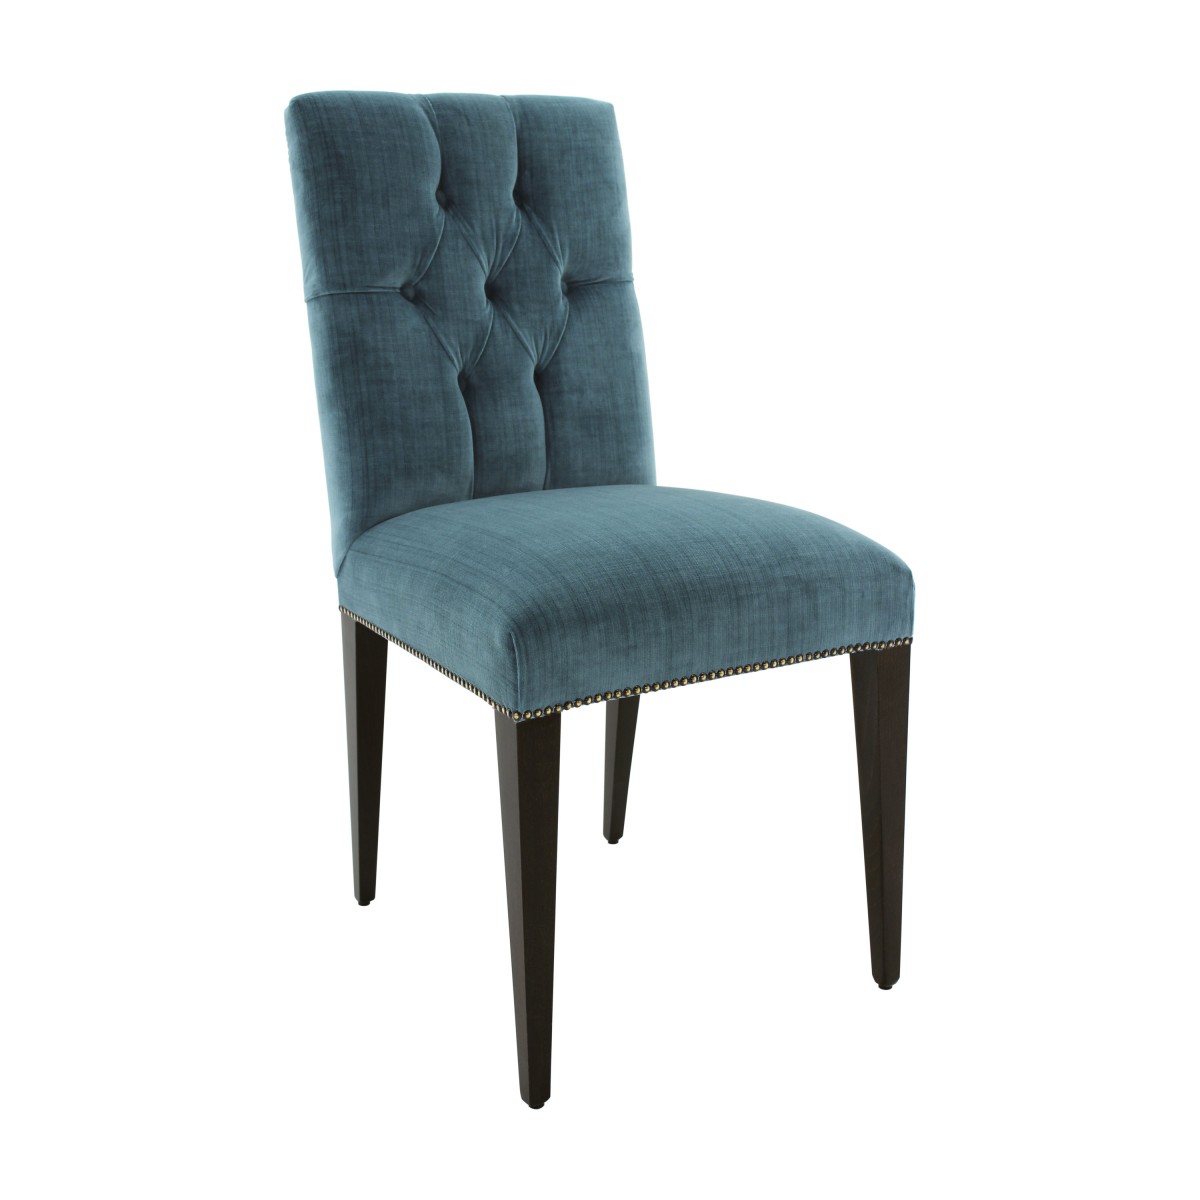 Contemporary replica chair Arianna by Sevensedie - beech wood frame -   padded back rest - Polished in Wengè finish  - Upholstered in ottanium velvet - trimmed with metal shaded nails 